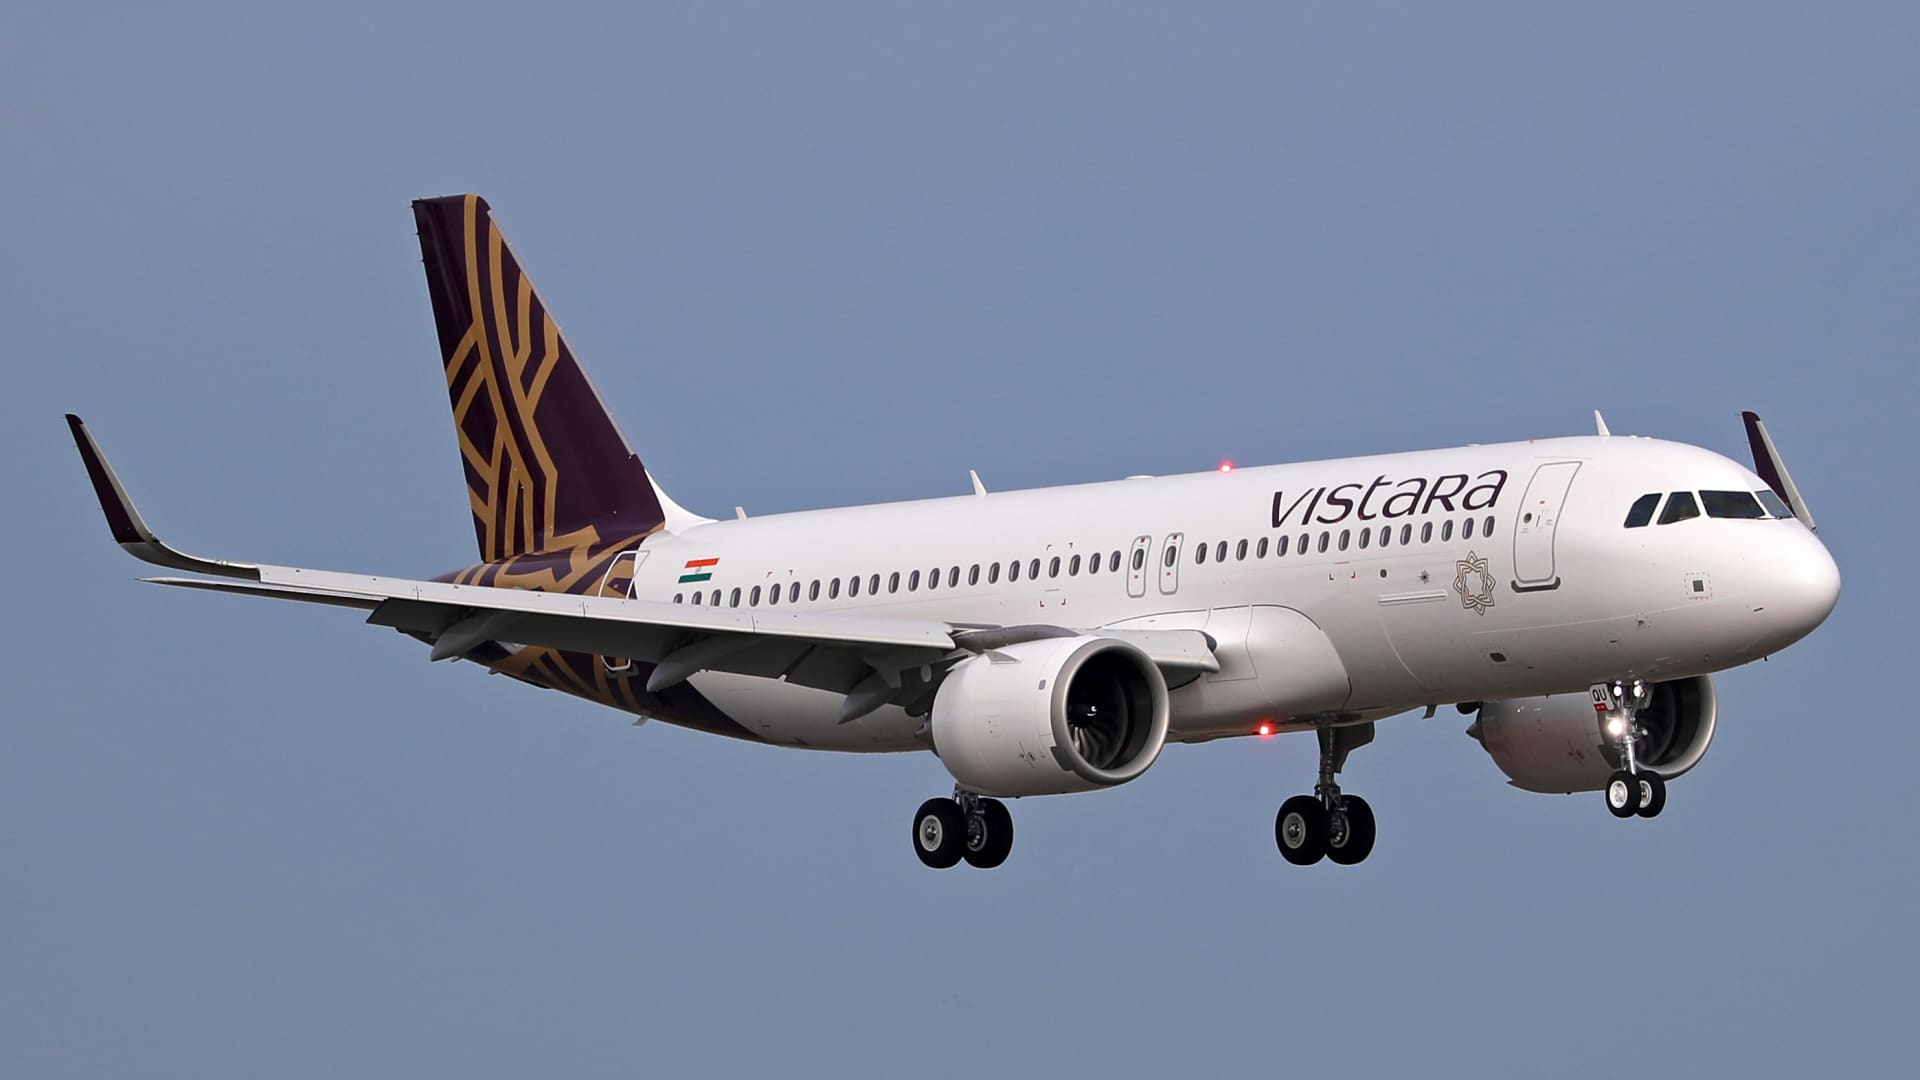 India's Vistara cuts flights as pilots' protest over salary revision leads to cancellations, delays